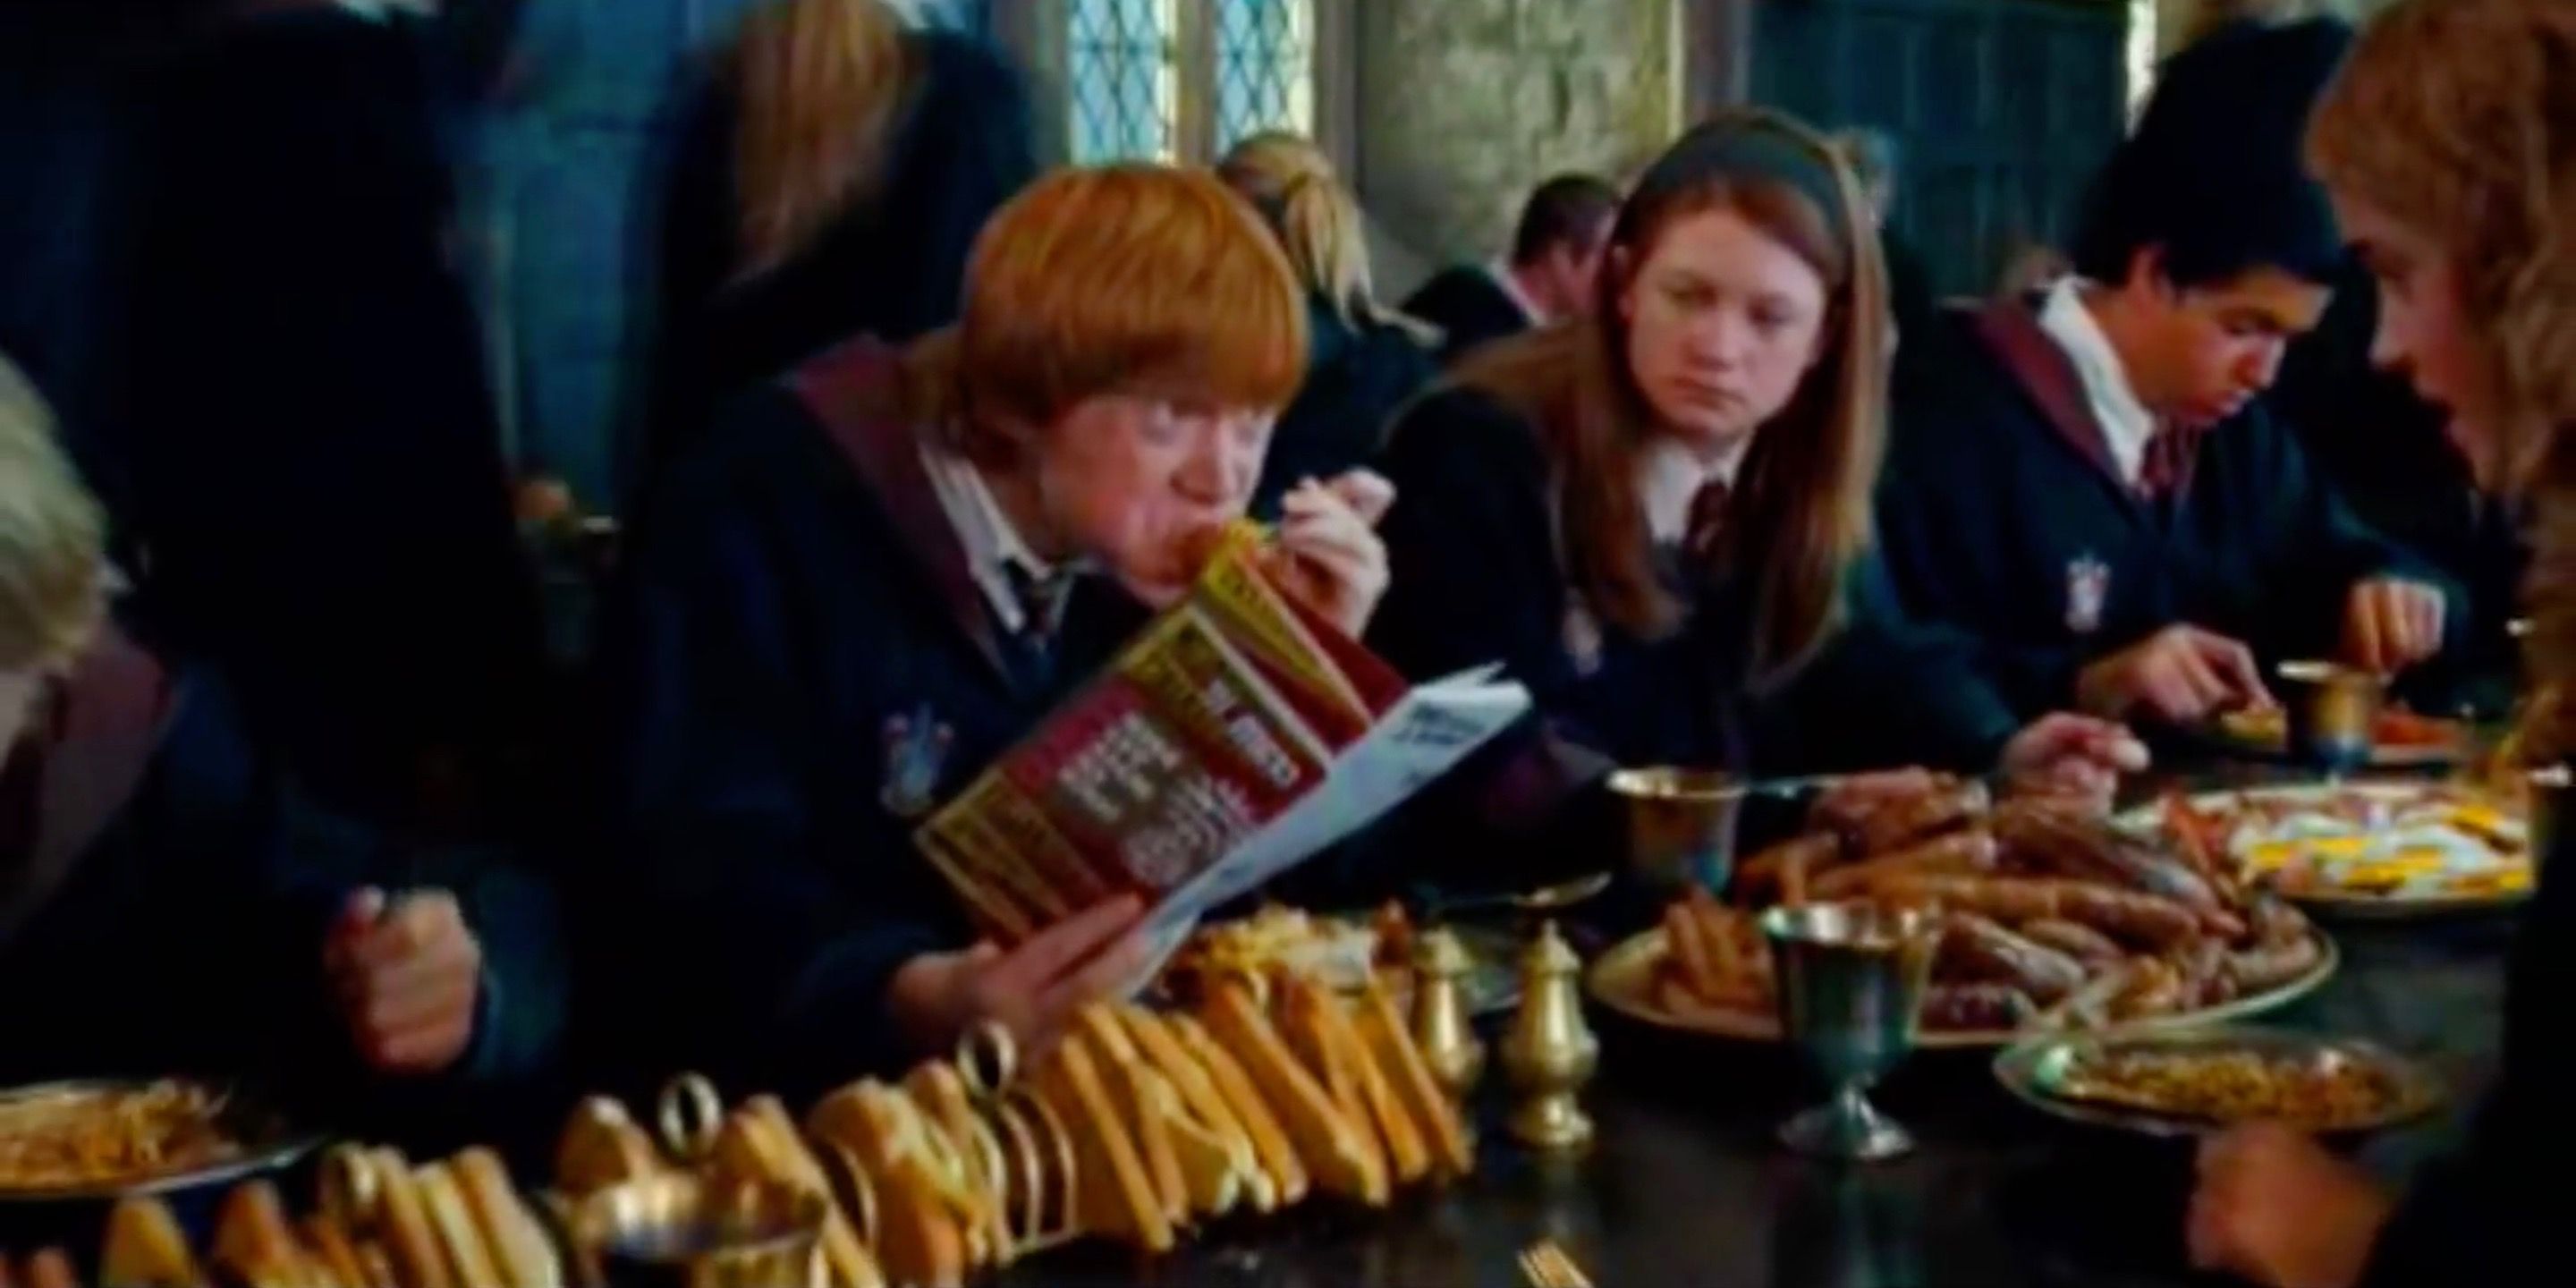 Harry Potter 10 Things About Ron Weasley The Movies Deliberately Changed